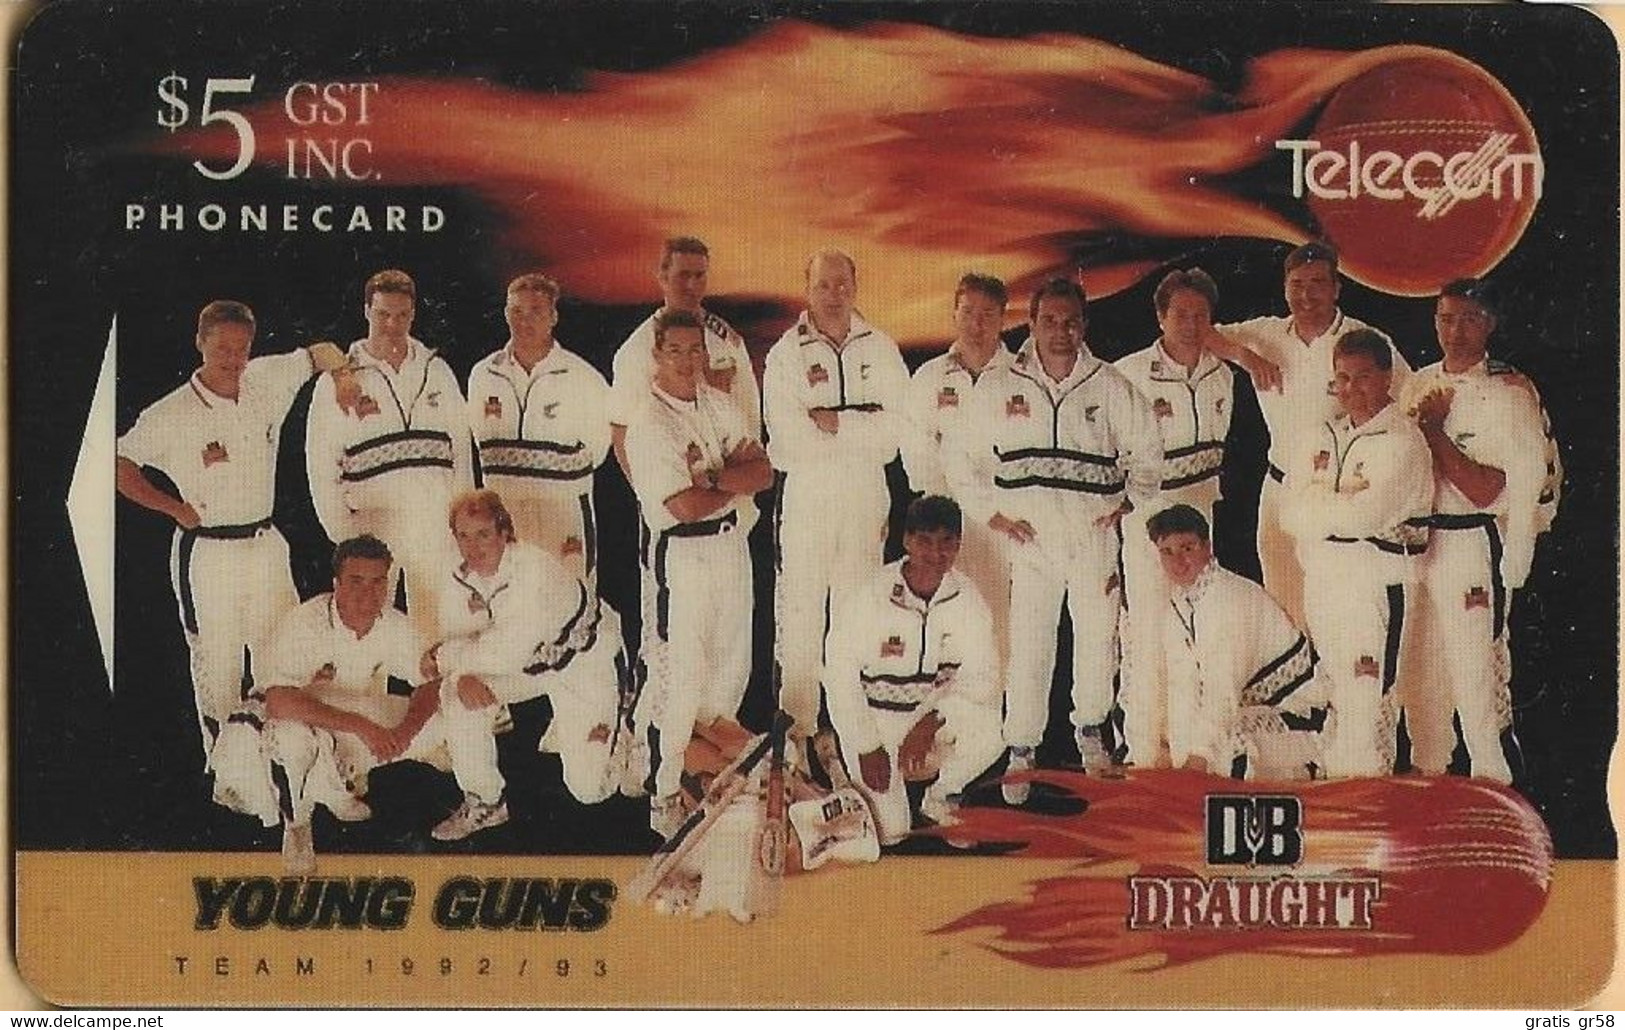 New Zealand - NZ-A-002, GPT, Draught, Young Guns Team 1992/93, Cricket, 20,000ex, 1993, VF Used - Neuseeland